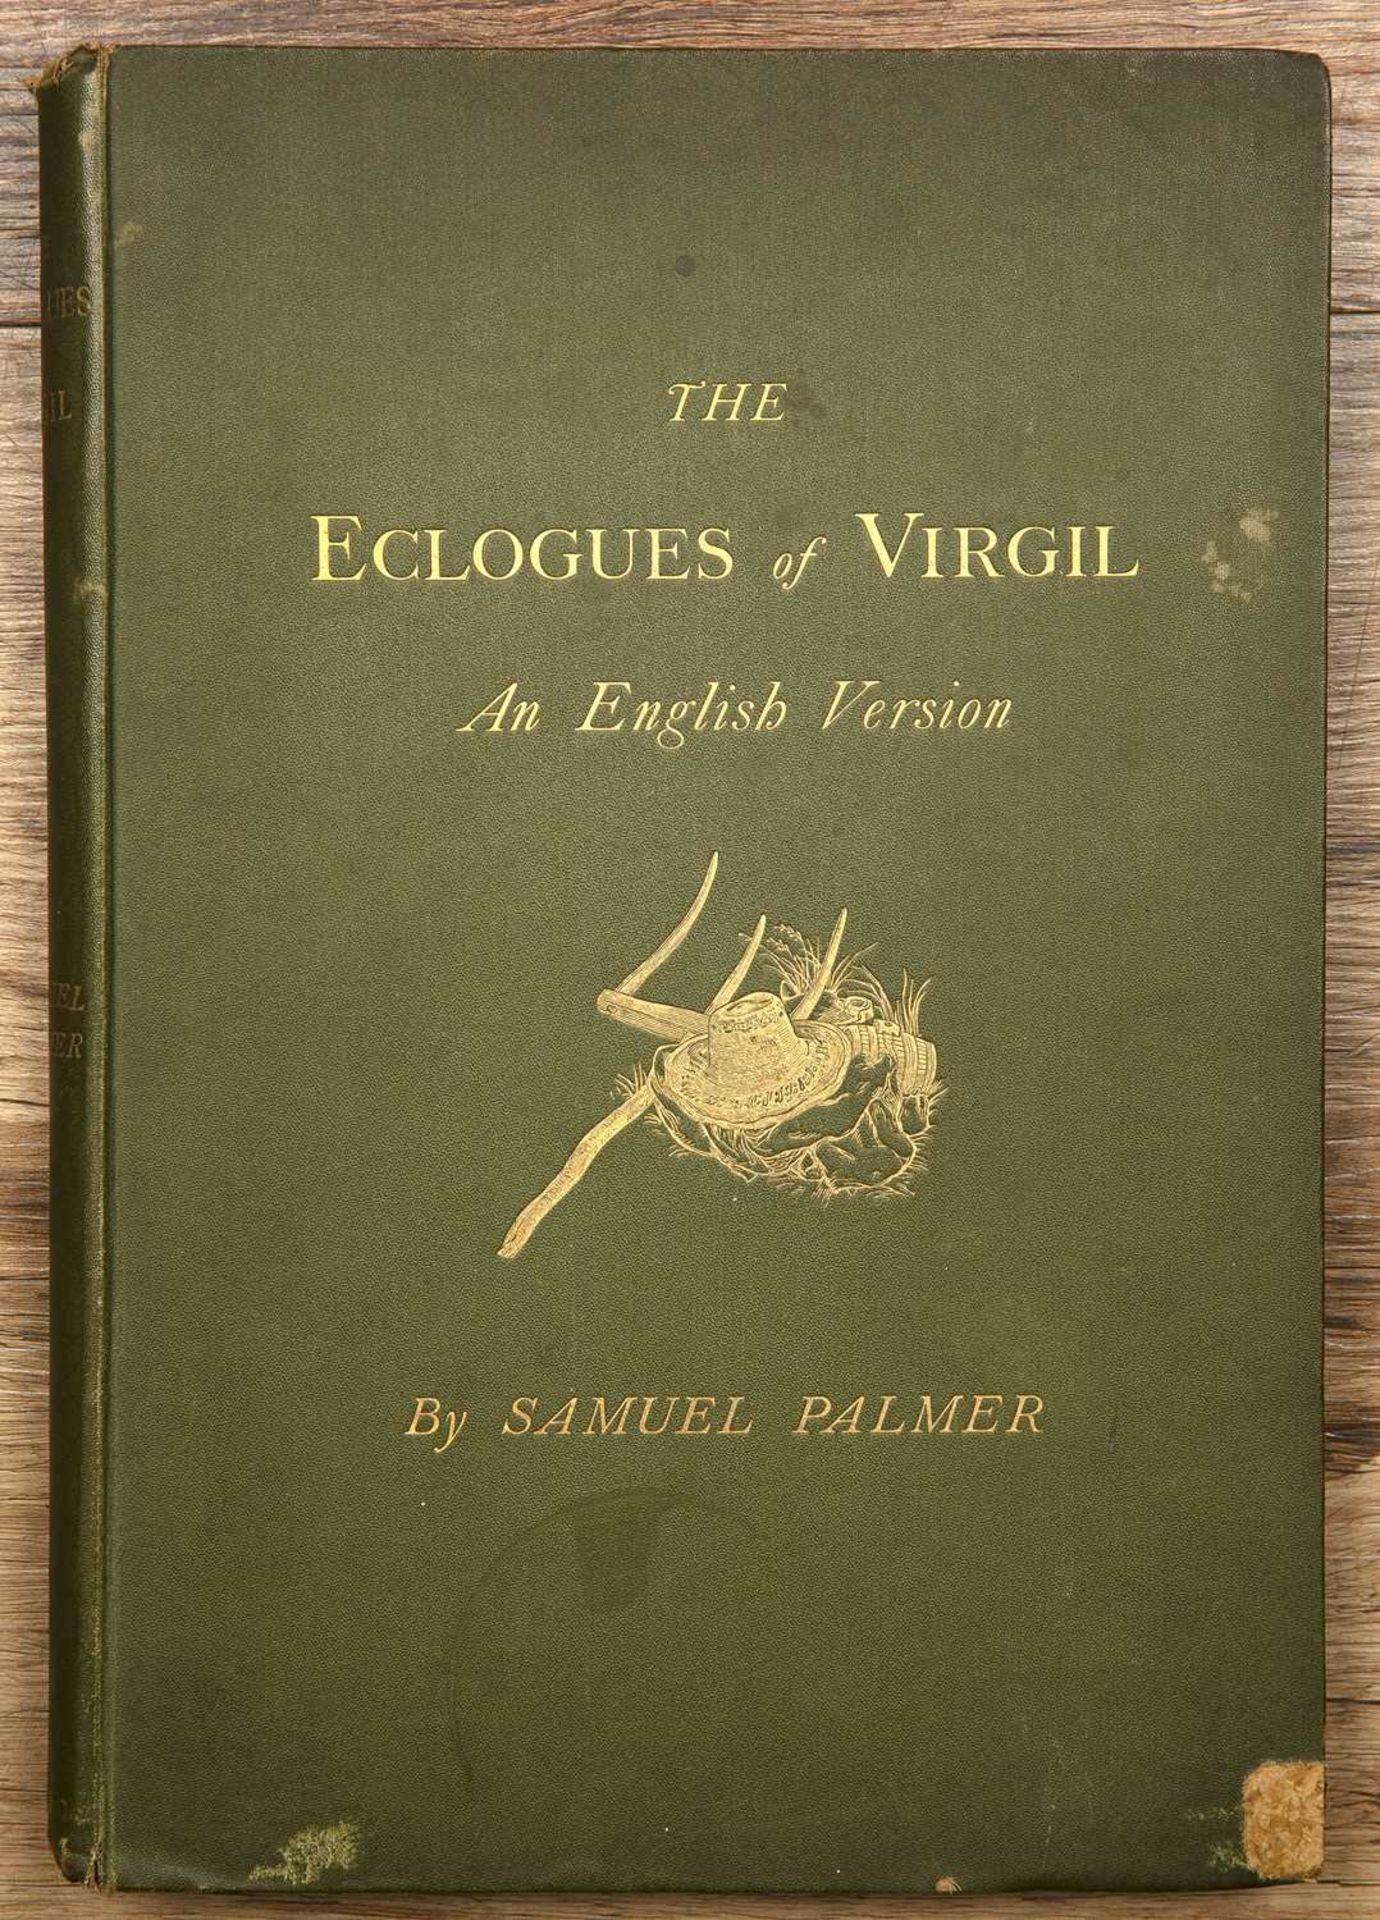 Palmer, Samuel (1805-1881) An English version of the Eclogues of Virgil. London, Seeley and Company,